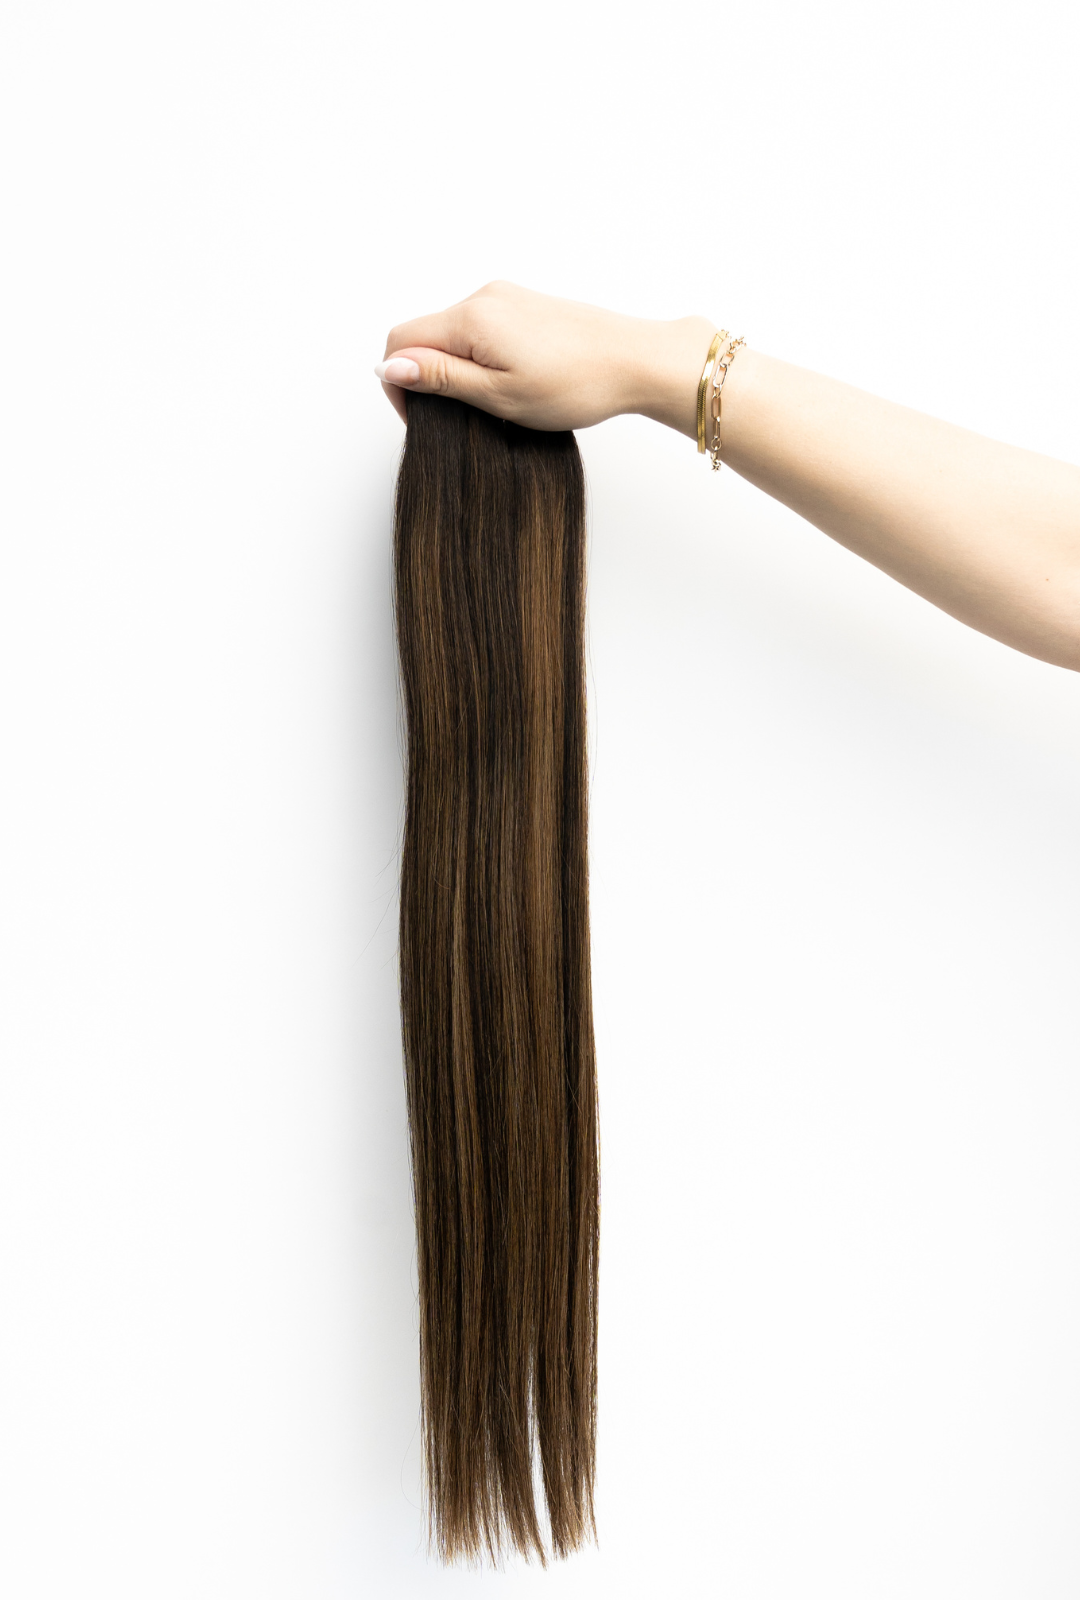 Beachwashed X Laced Hair Machine Sewn Weft Extensions - Sea